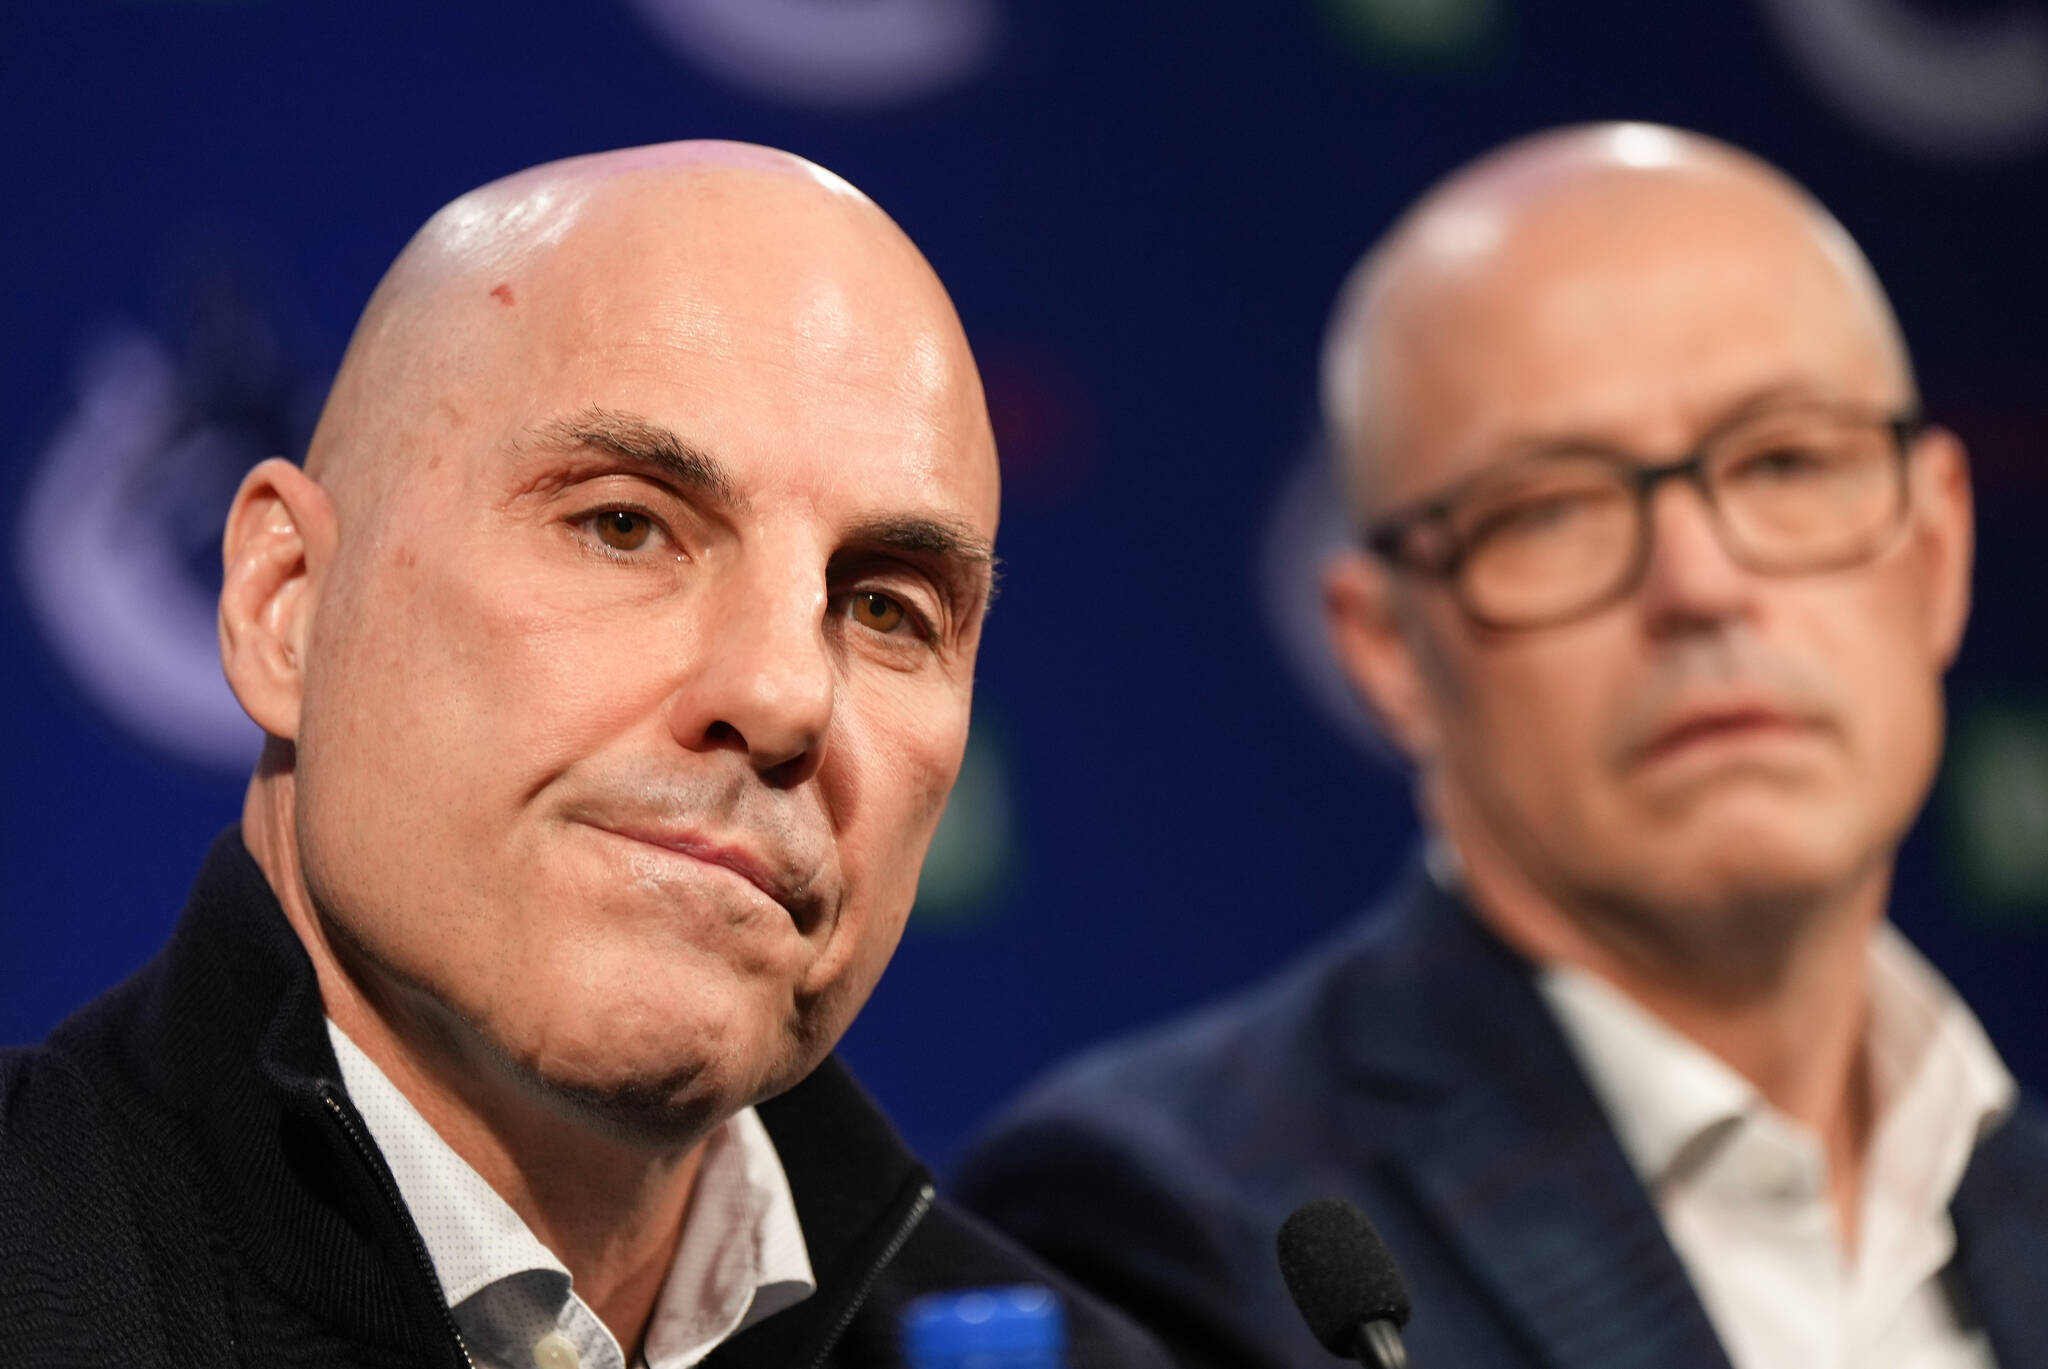 Vancouver Canucks head coach Rick Tocchet, front left, and general manager Patrik Allvin listen during a news conference after the NHL hockey team announced Tocchet’s hiring, in Vancouver, on Sunday, January 22, 2023. THE CANADIAN PRESS/Darryl Dyck